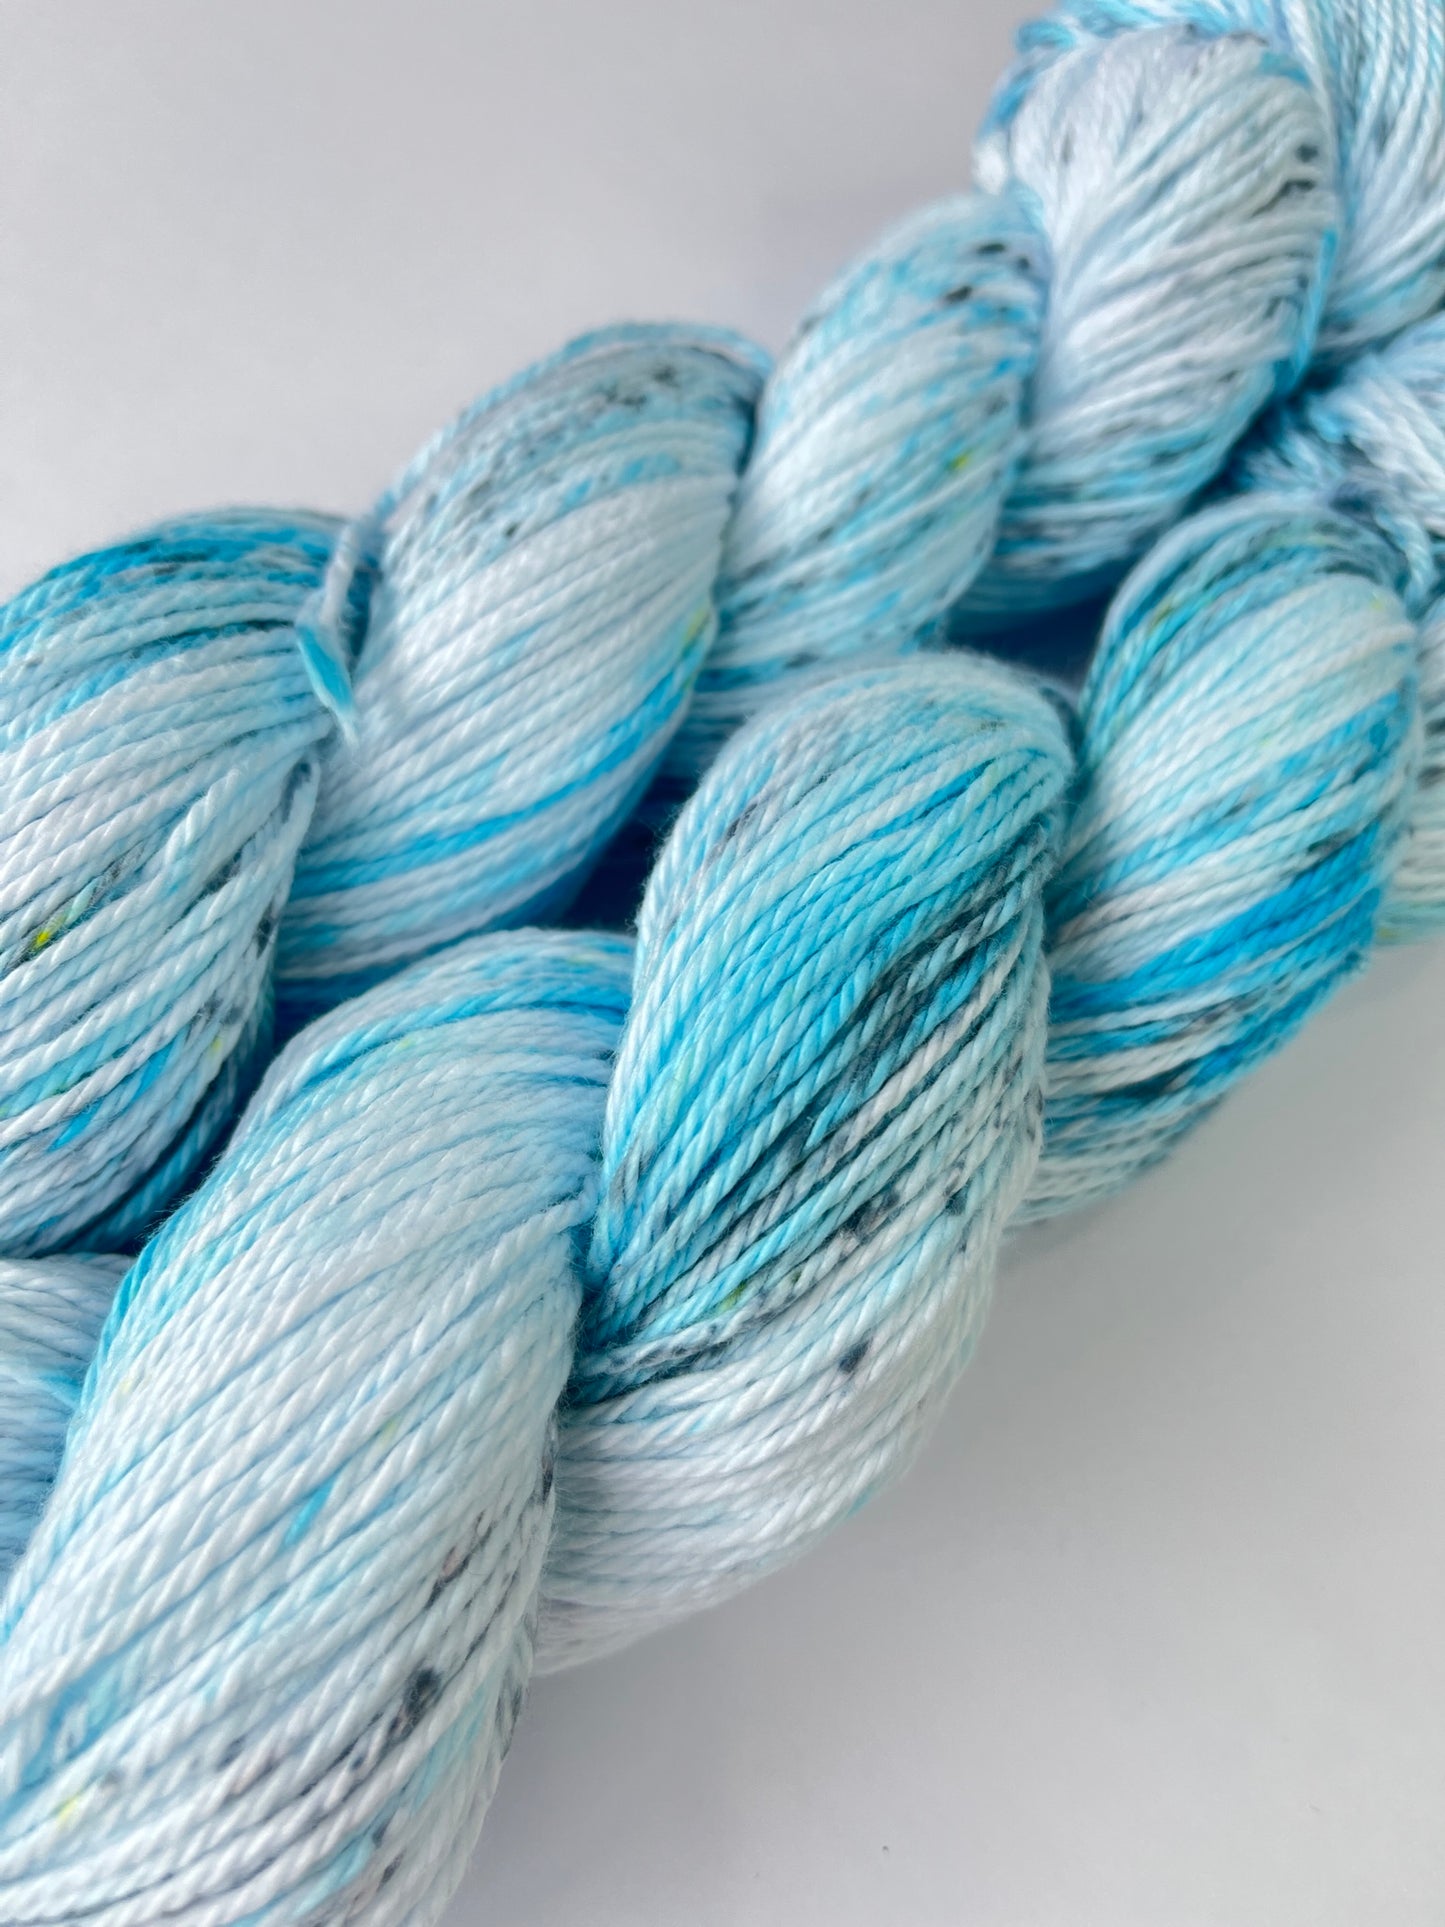 Inspired by Margot Storms a brewin' - Cotton baseStorms a brewin' is a mostly white base yarn, with a generous sprinkle of turquoise and black, giving it a beautiful, dramatic look!
This 100% cotton yarn is soft toInspired by Margot brewin' - Cotton base